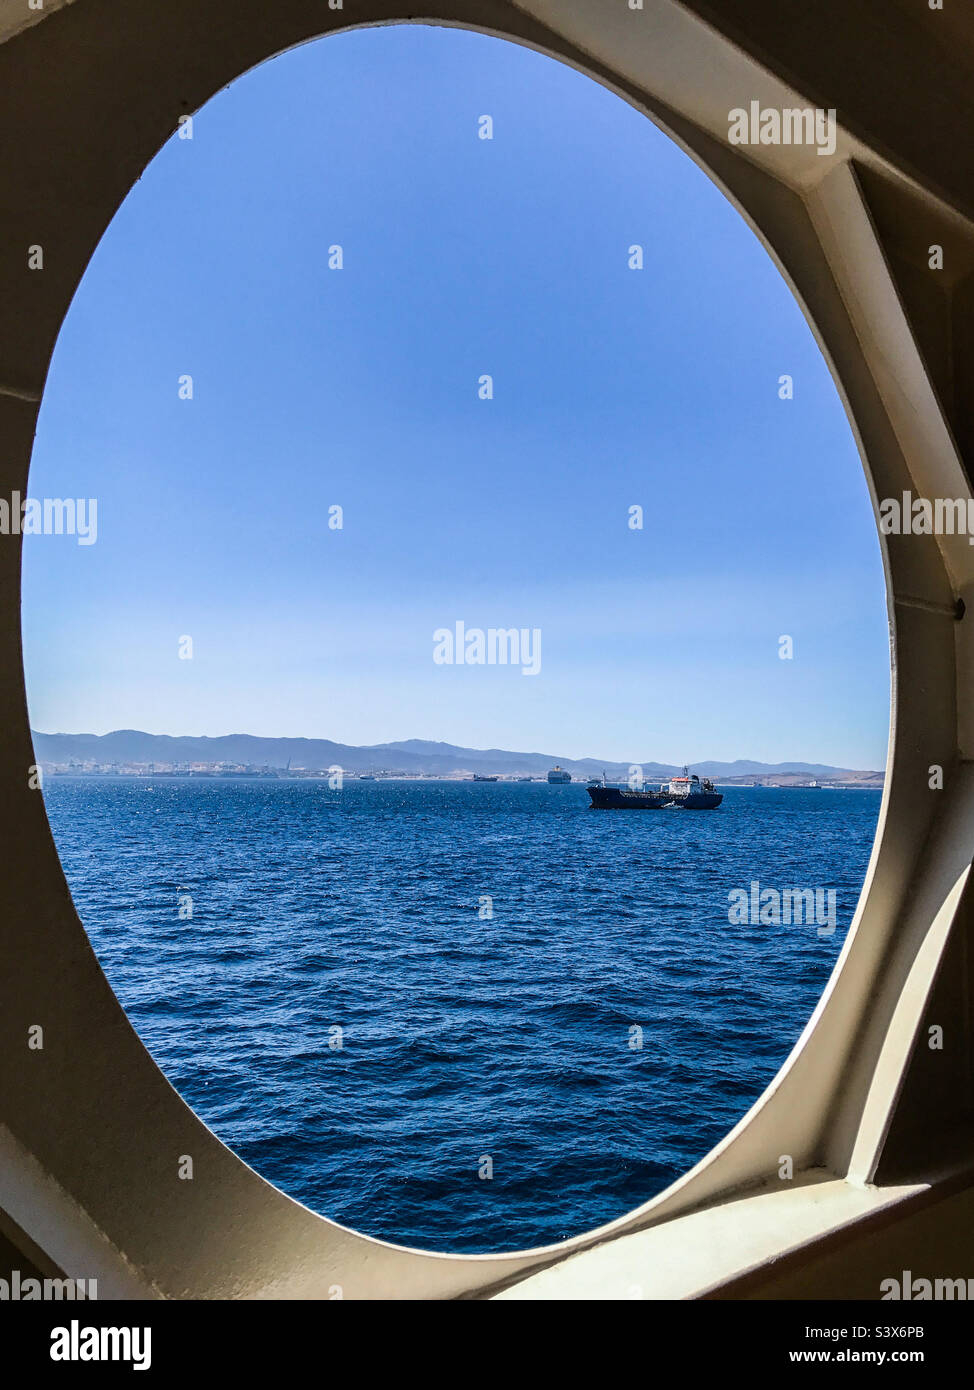 Open ship port hole looking onto Strait of Gibraltar Stock Photo